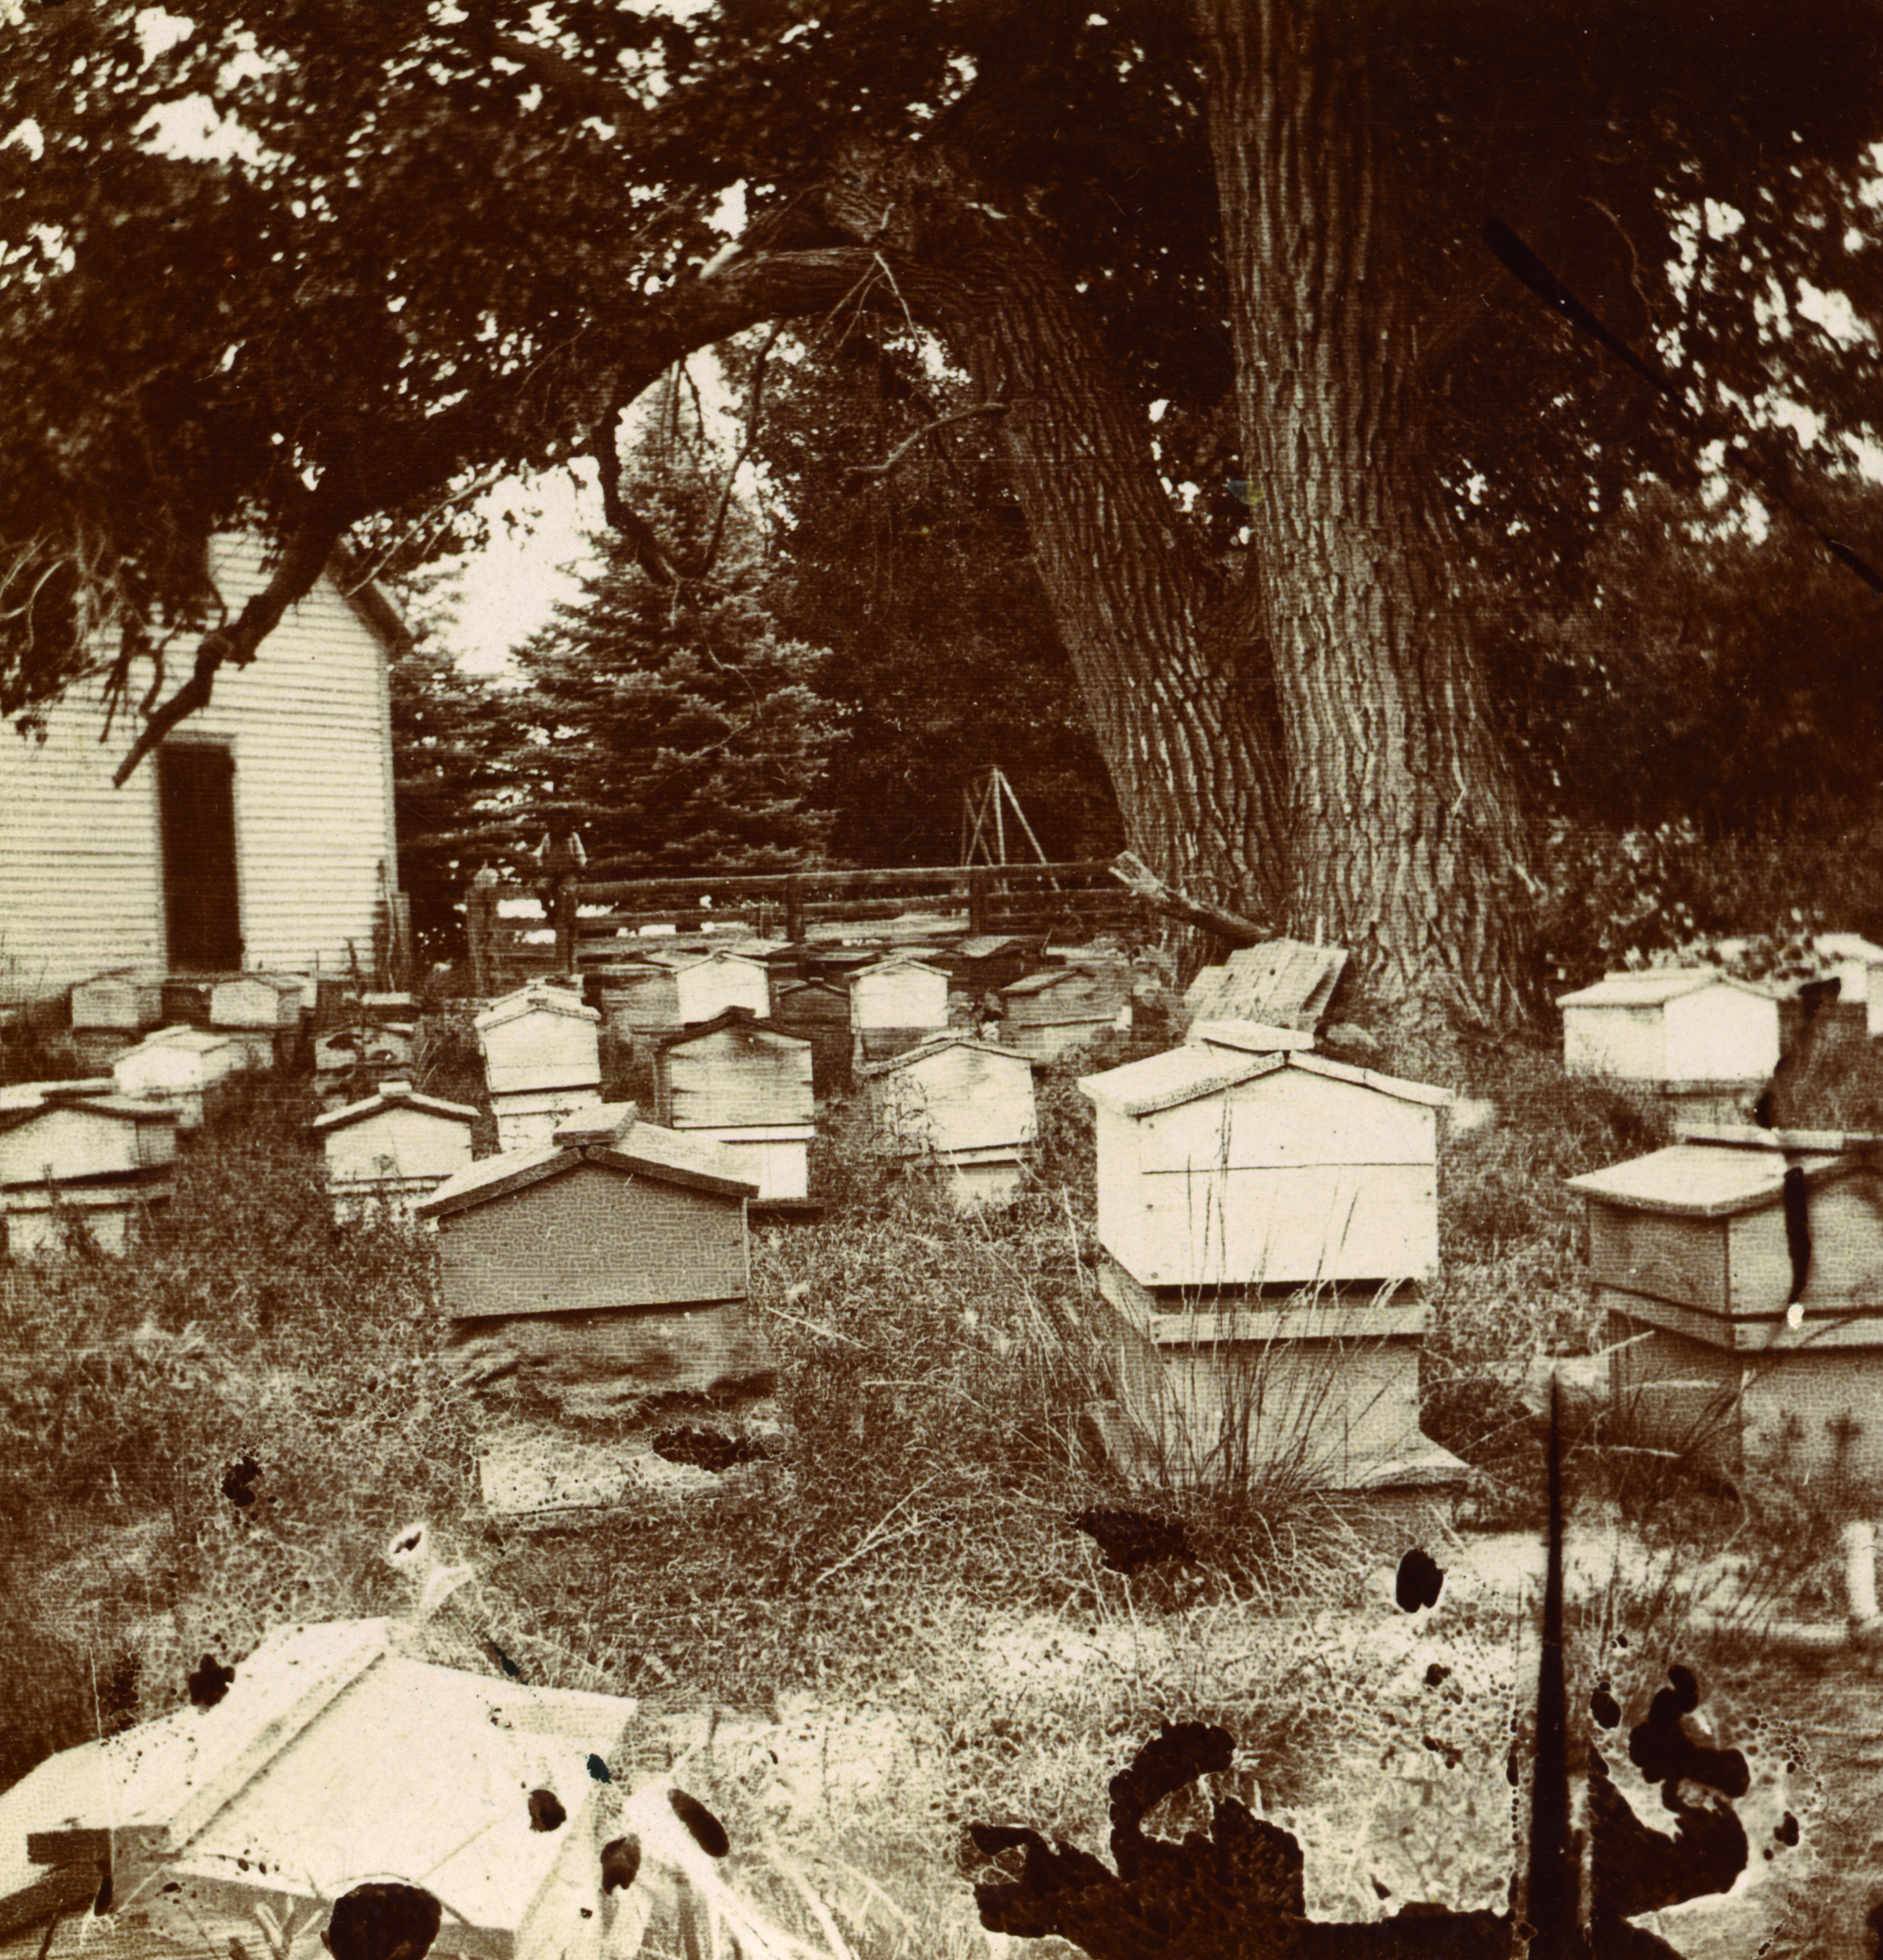 Millie’s Beehives in the 1880s (Four Mile Historic Park, Denver, CO)